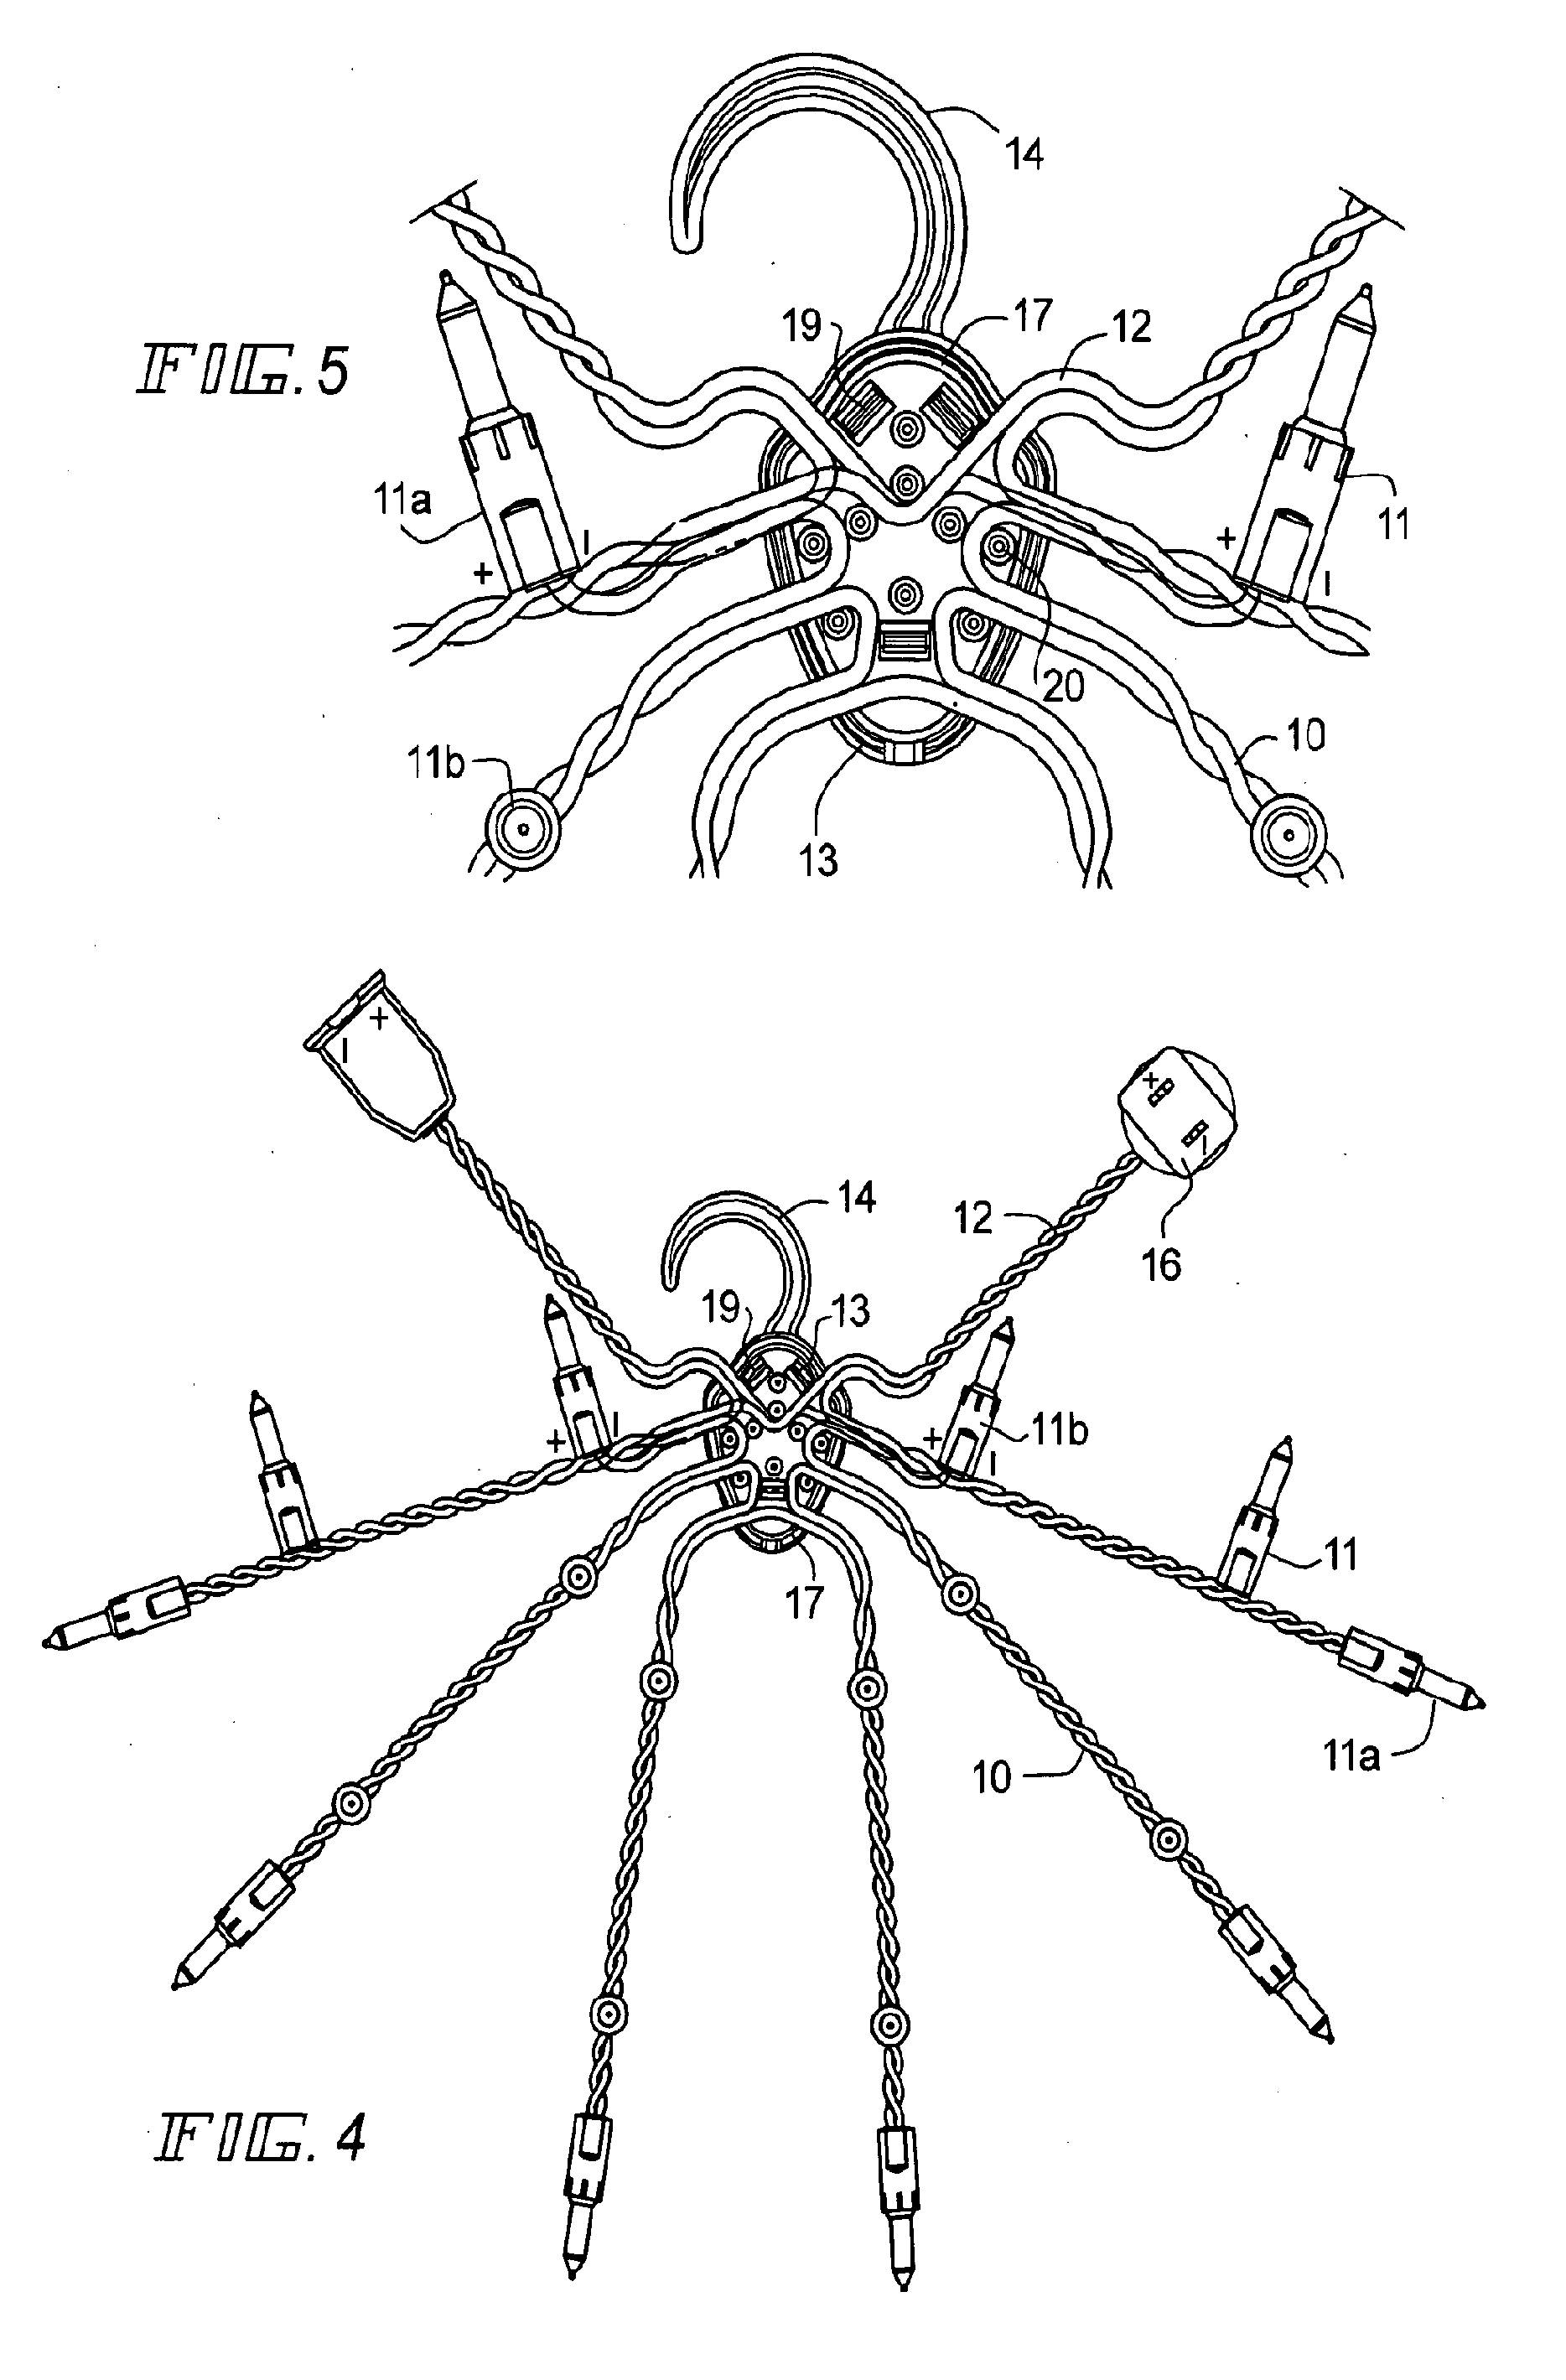 Decorative Lighting Strand and Method of Assembling and Installing Same